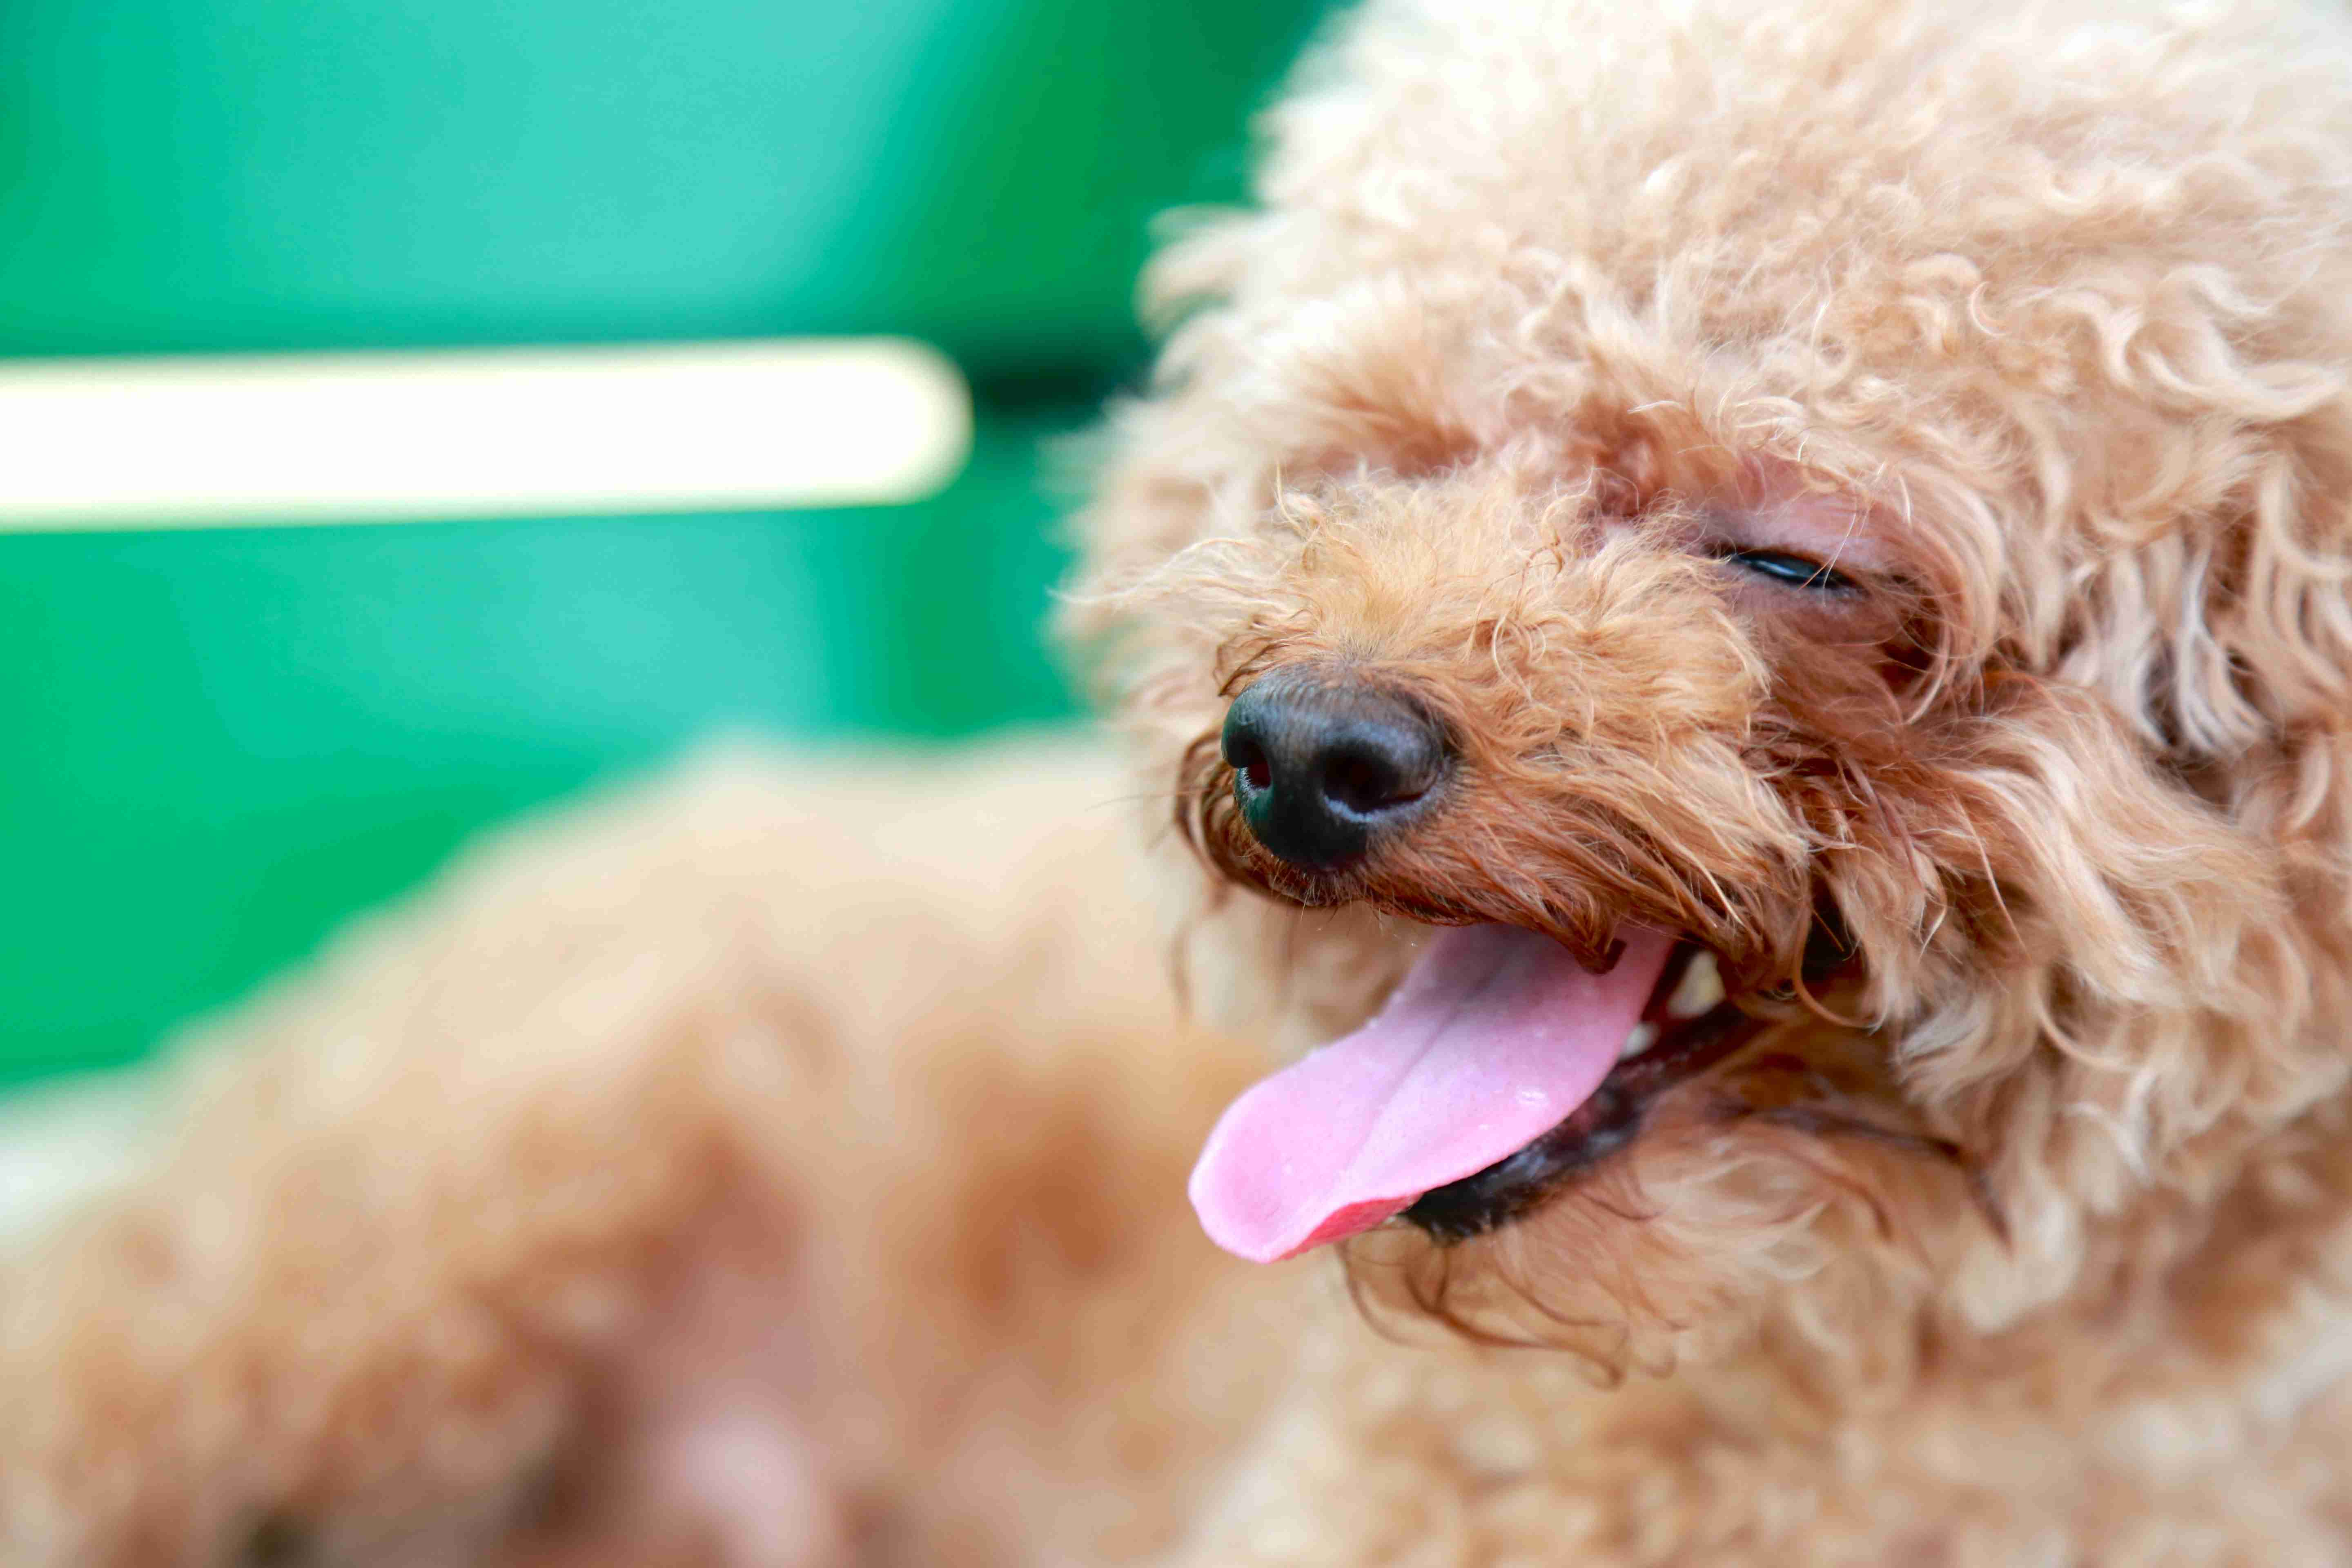 How did you handle any instances of excessive digging or destructive behavior in your Poodle puppy?